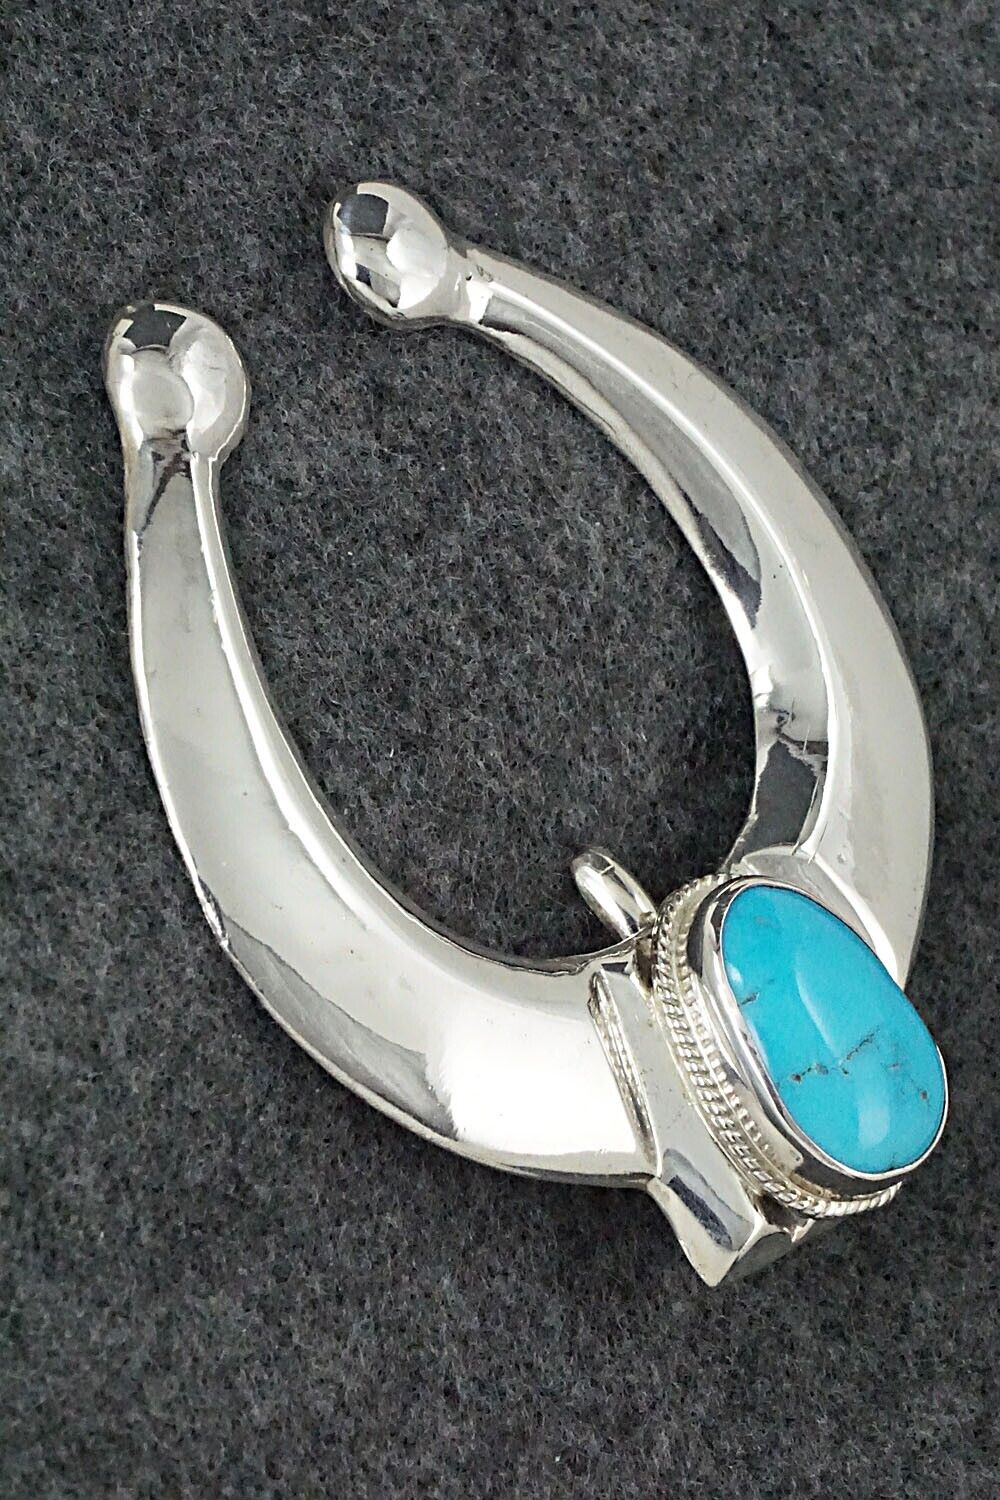 Turquoise and Sterling Silver Pendant - Randy Roberts